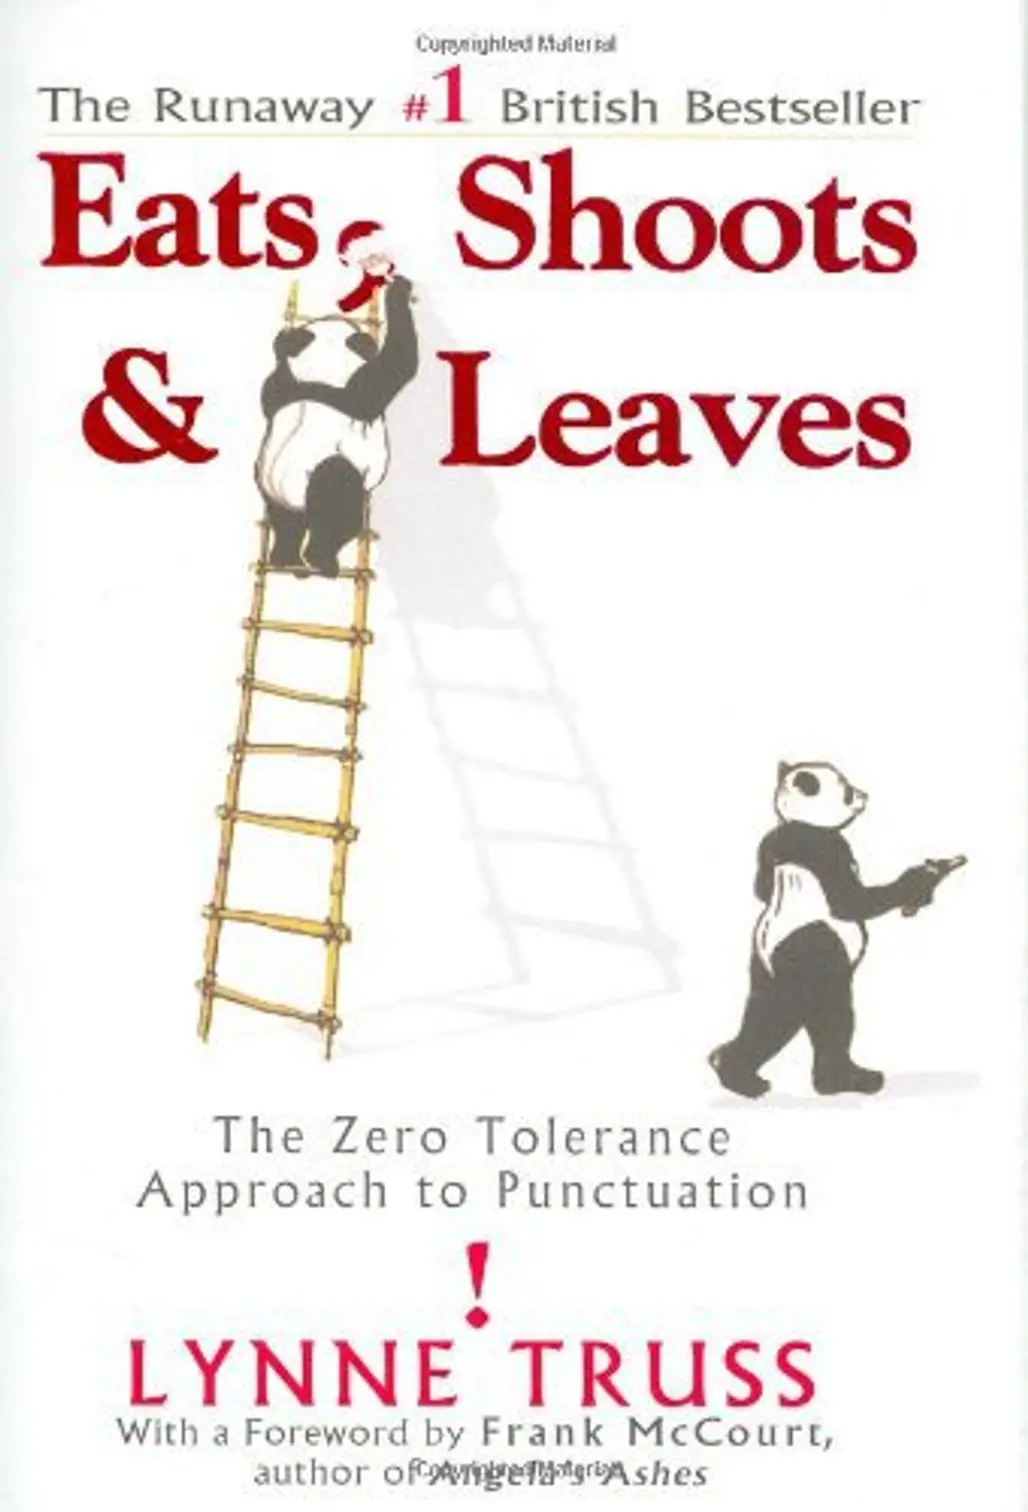 “Eats, Shoots & Leaves: the Zero Tolerance Approach to Punctuation” by Lynne Truss